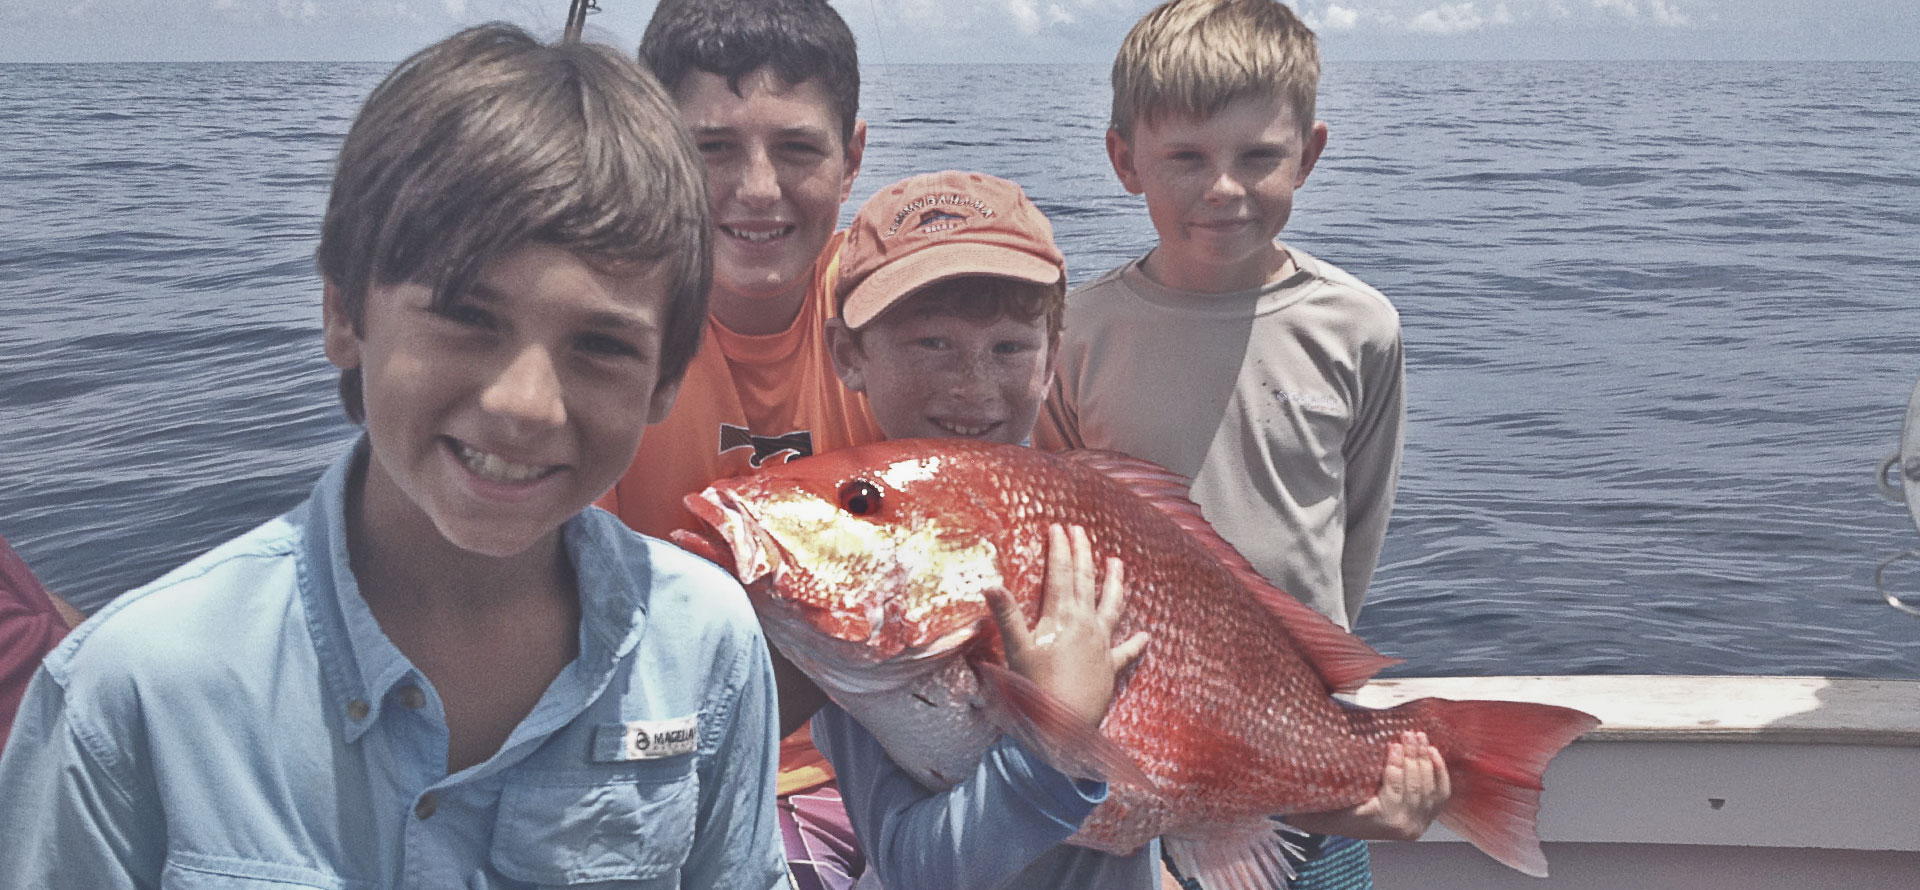 j-hook-fishing-charters-st-augustine-florida-kid-friendly-activity-vacation